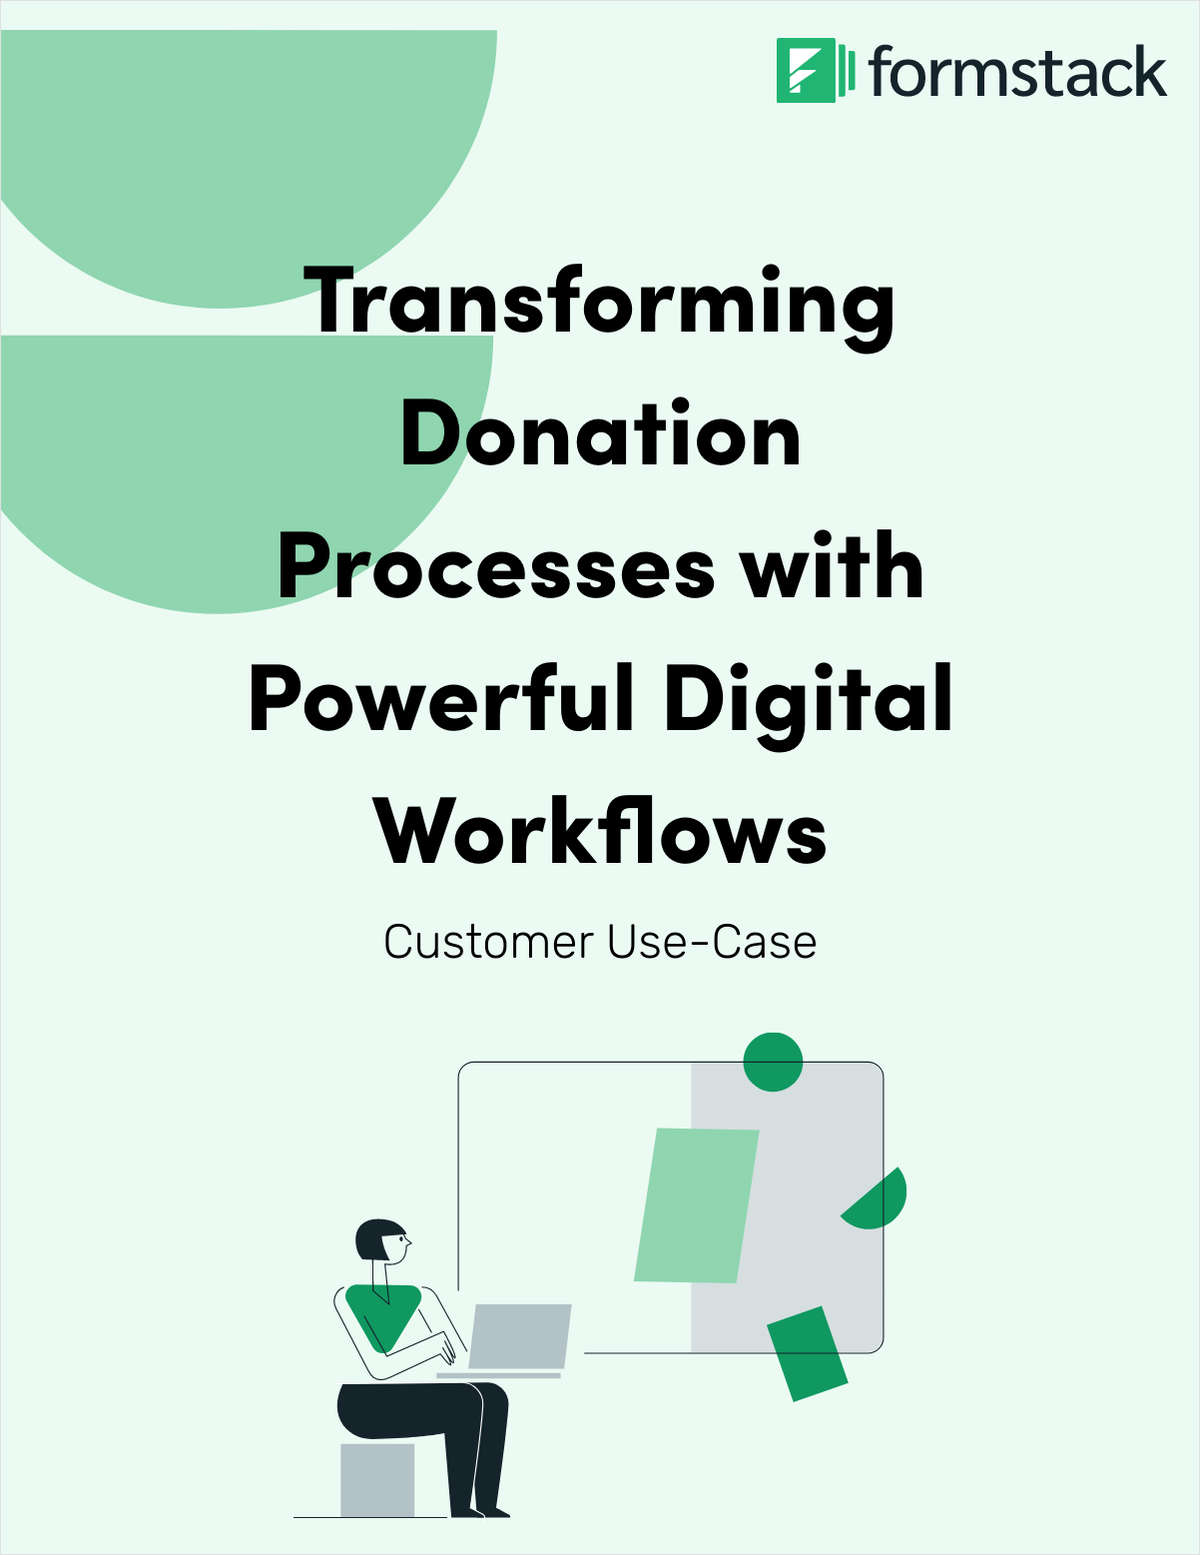 Transforming Donation Processes with Powerful Digital Workflows